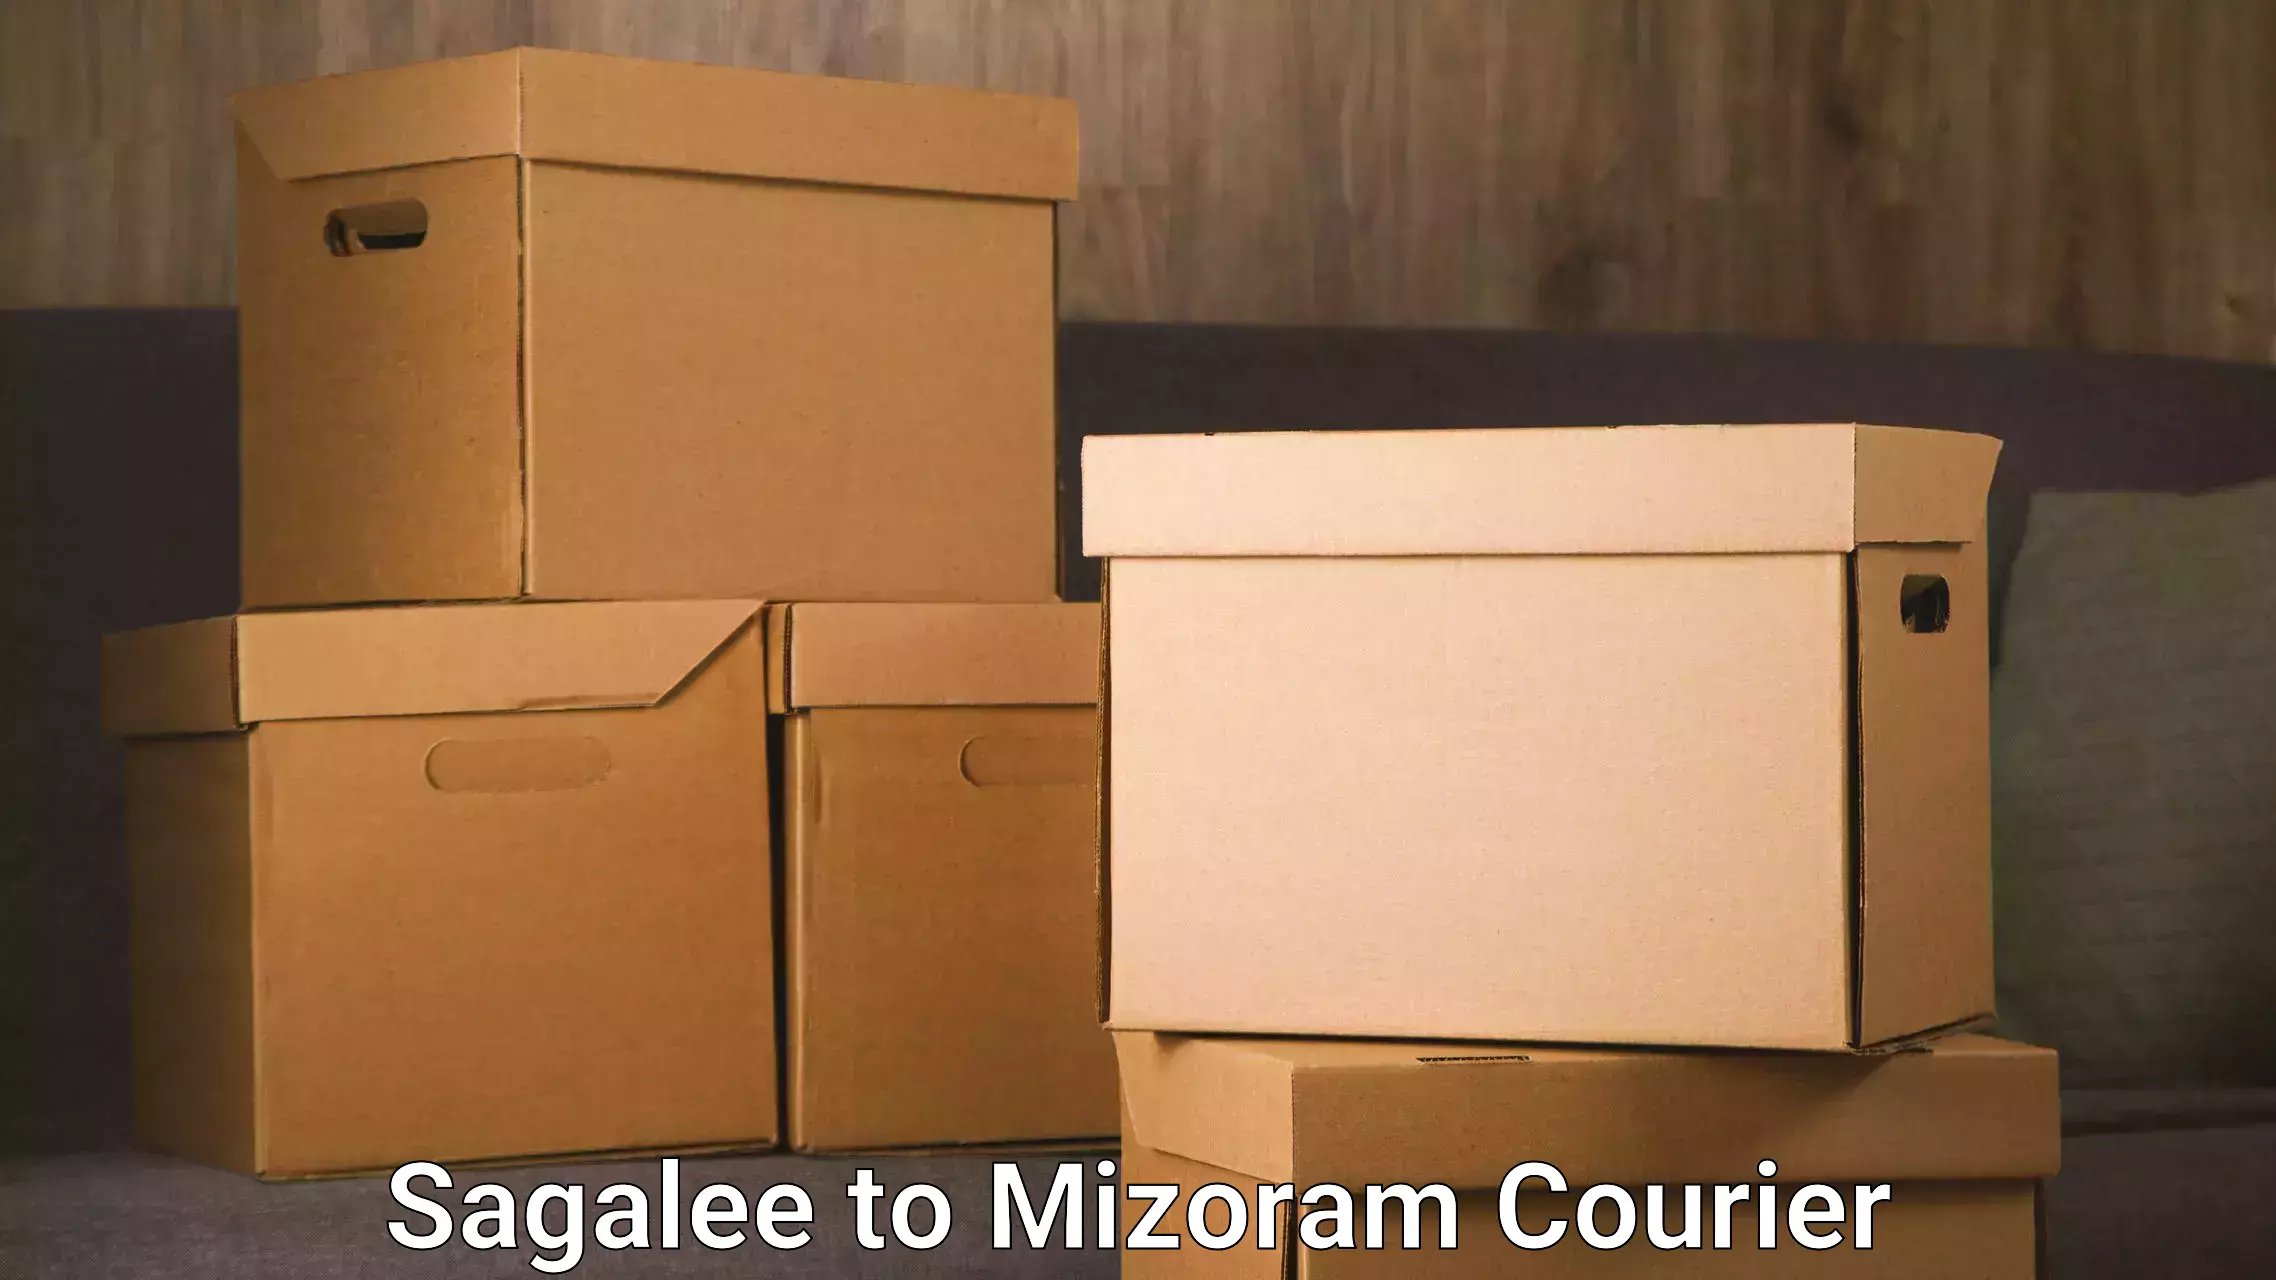 Same-day delivery options in Sagalee to Mizoram